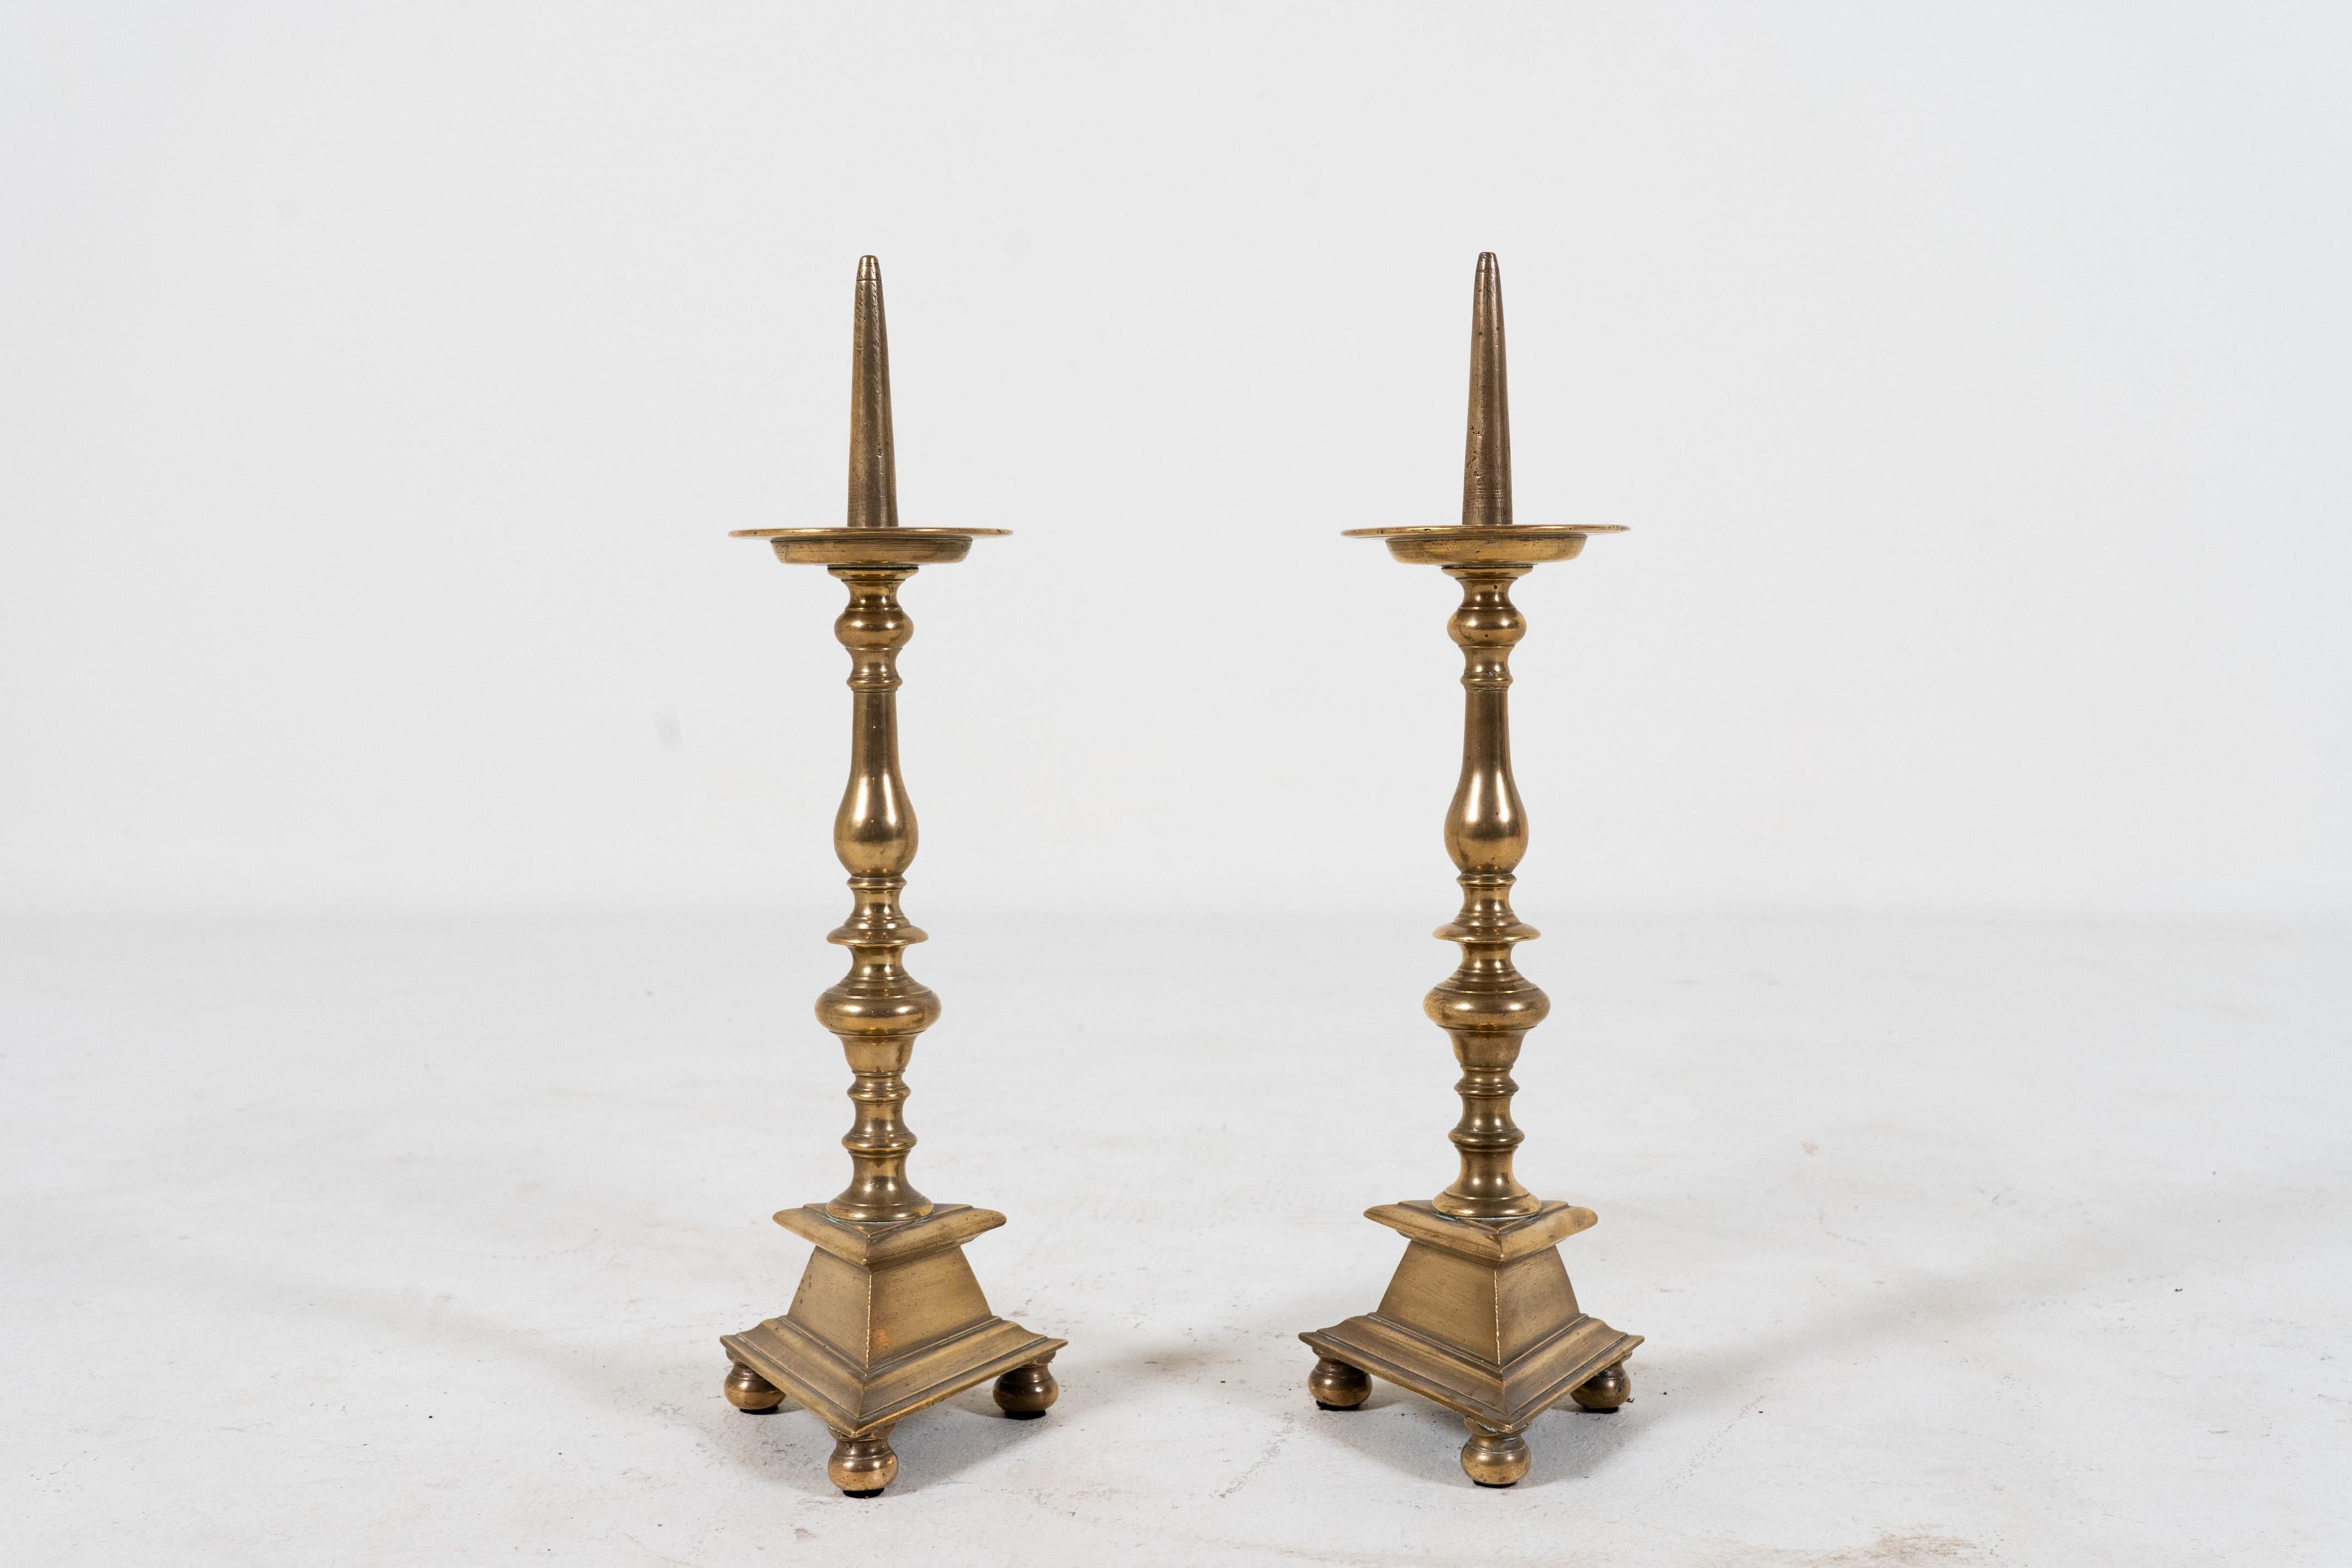 These large and elegant solid brass candle holders were found in Avignon, France and feature stylish triangular bases. The surface patina, once polished, has gently dulled with exposure and use. The candle cup can accept wax candles up to 4 1/2